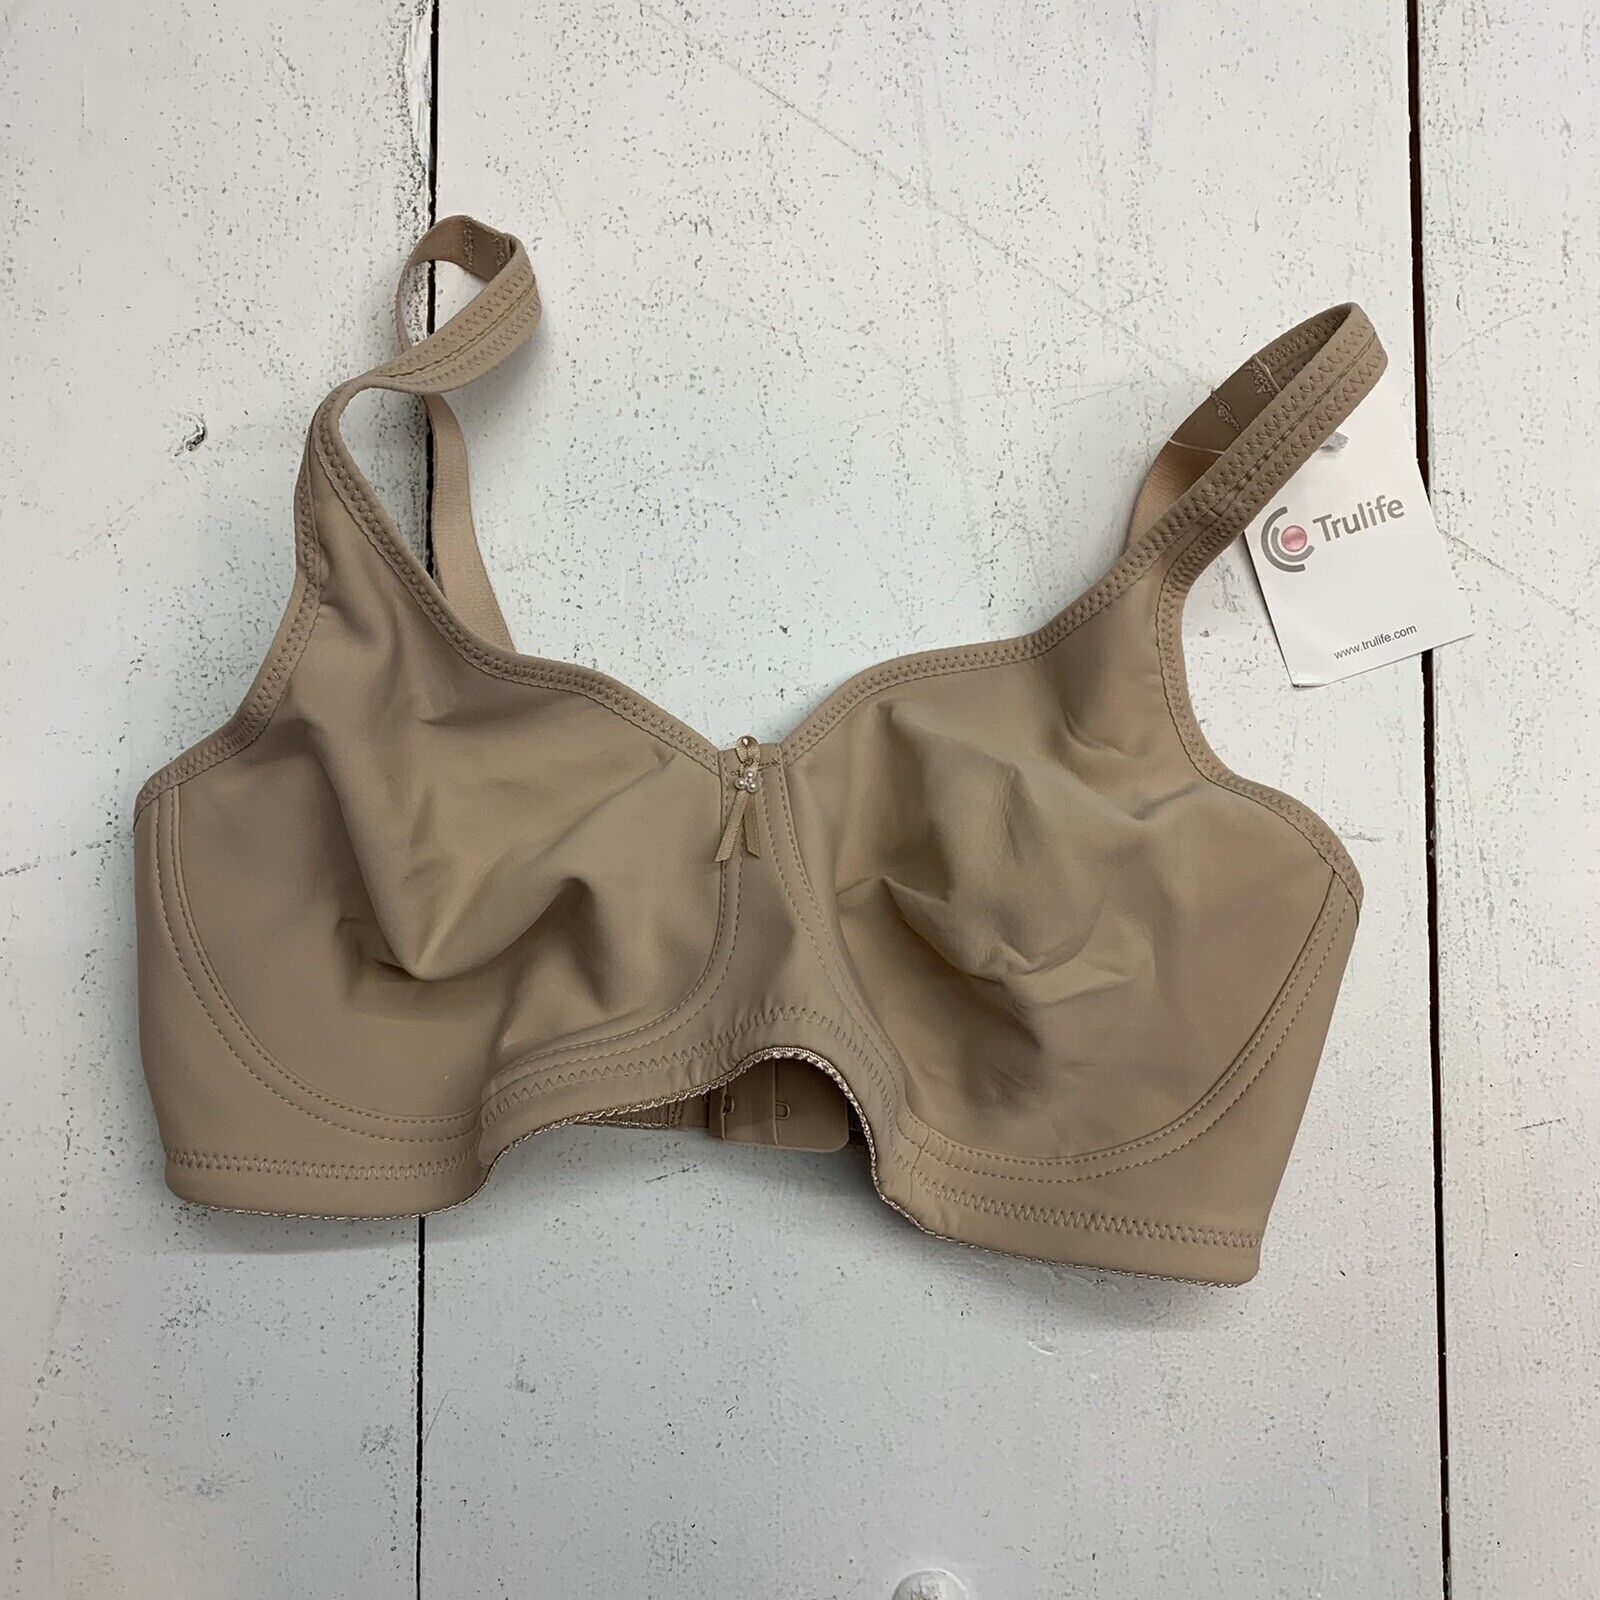 Trulife Masectomy Tan Bra Size 36D